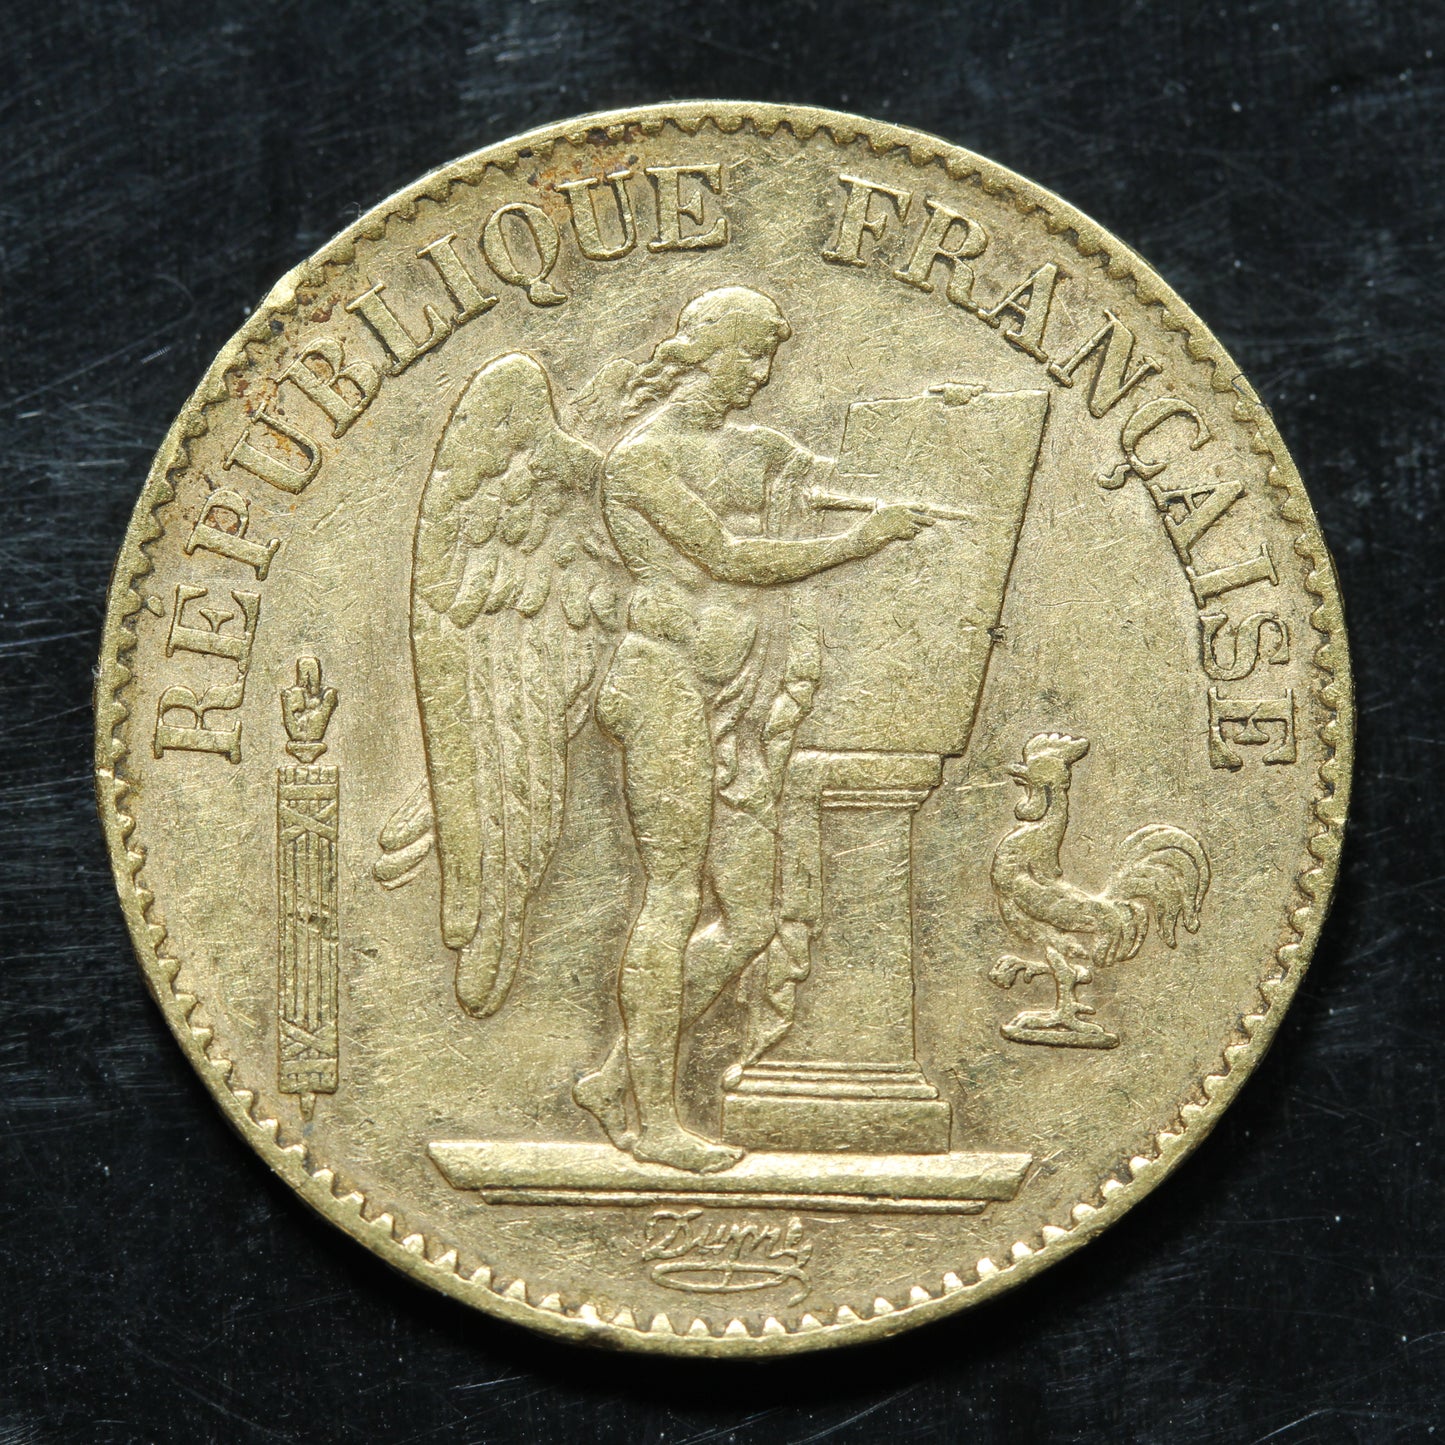 1889 A French Gold 20 Francs Lucky Angel Coin - KM# 825